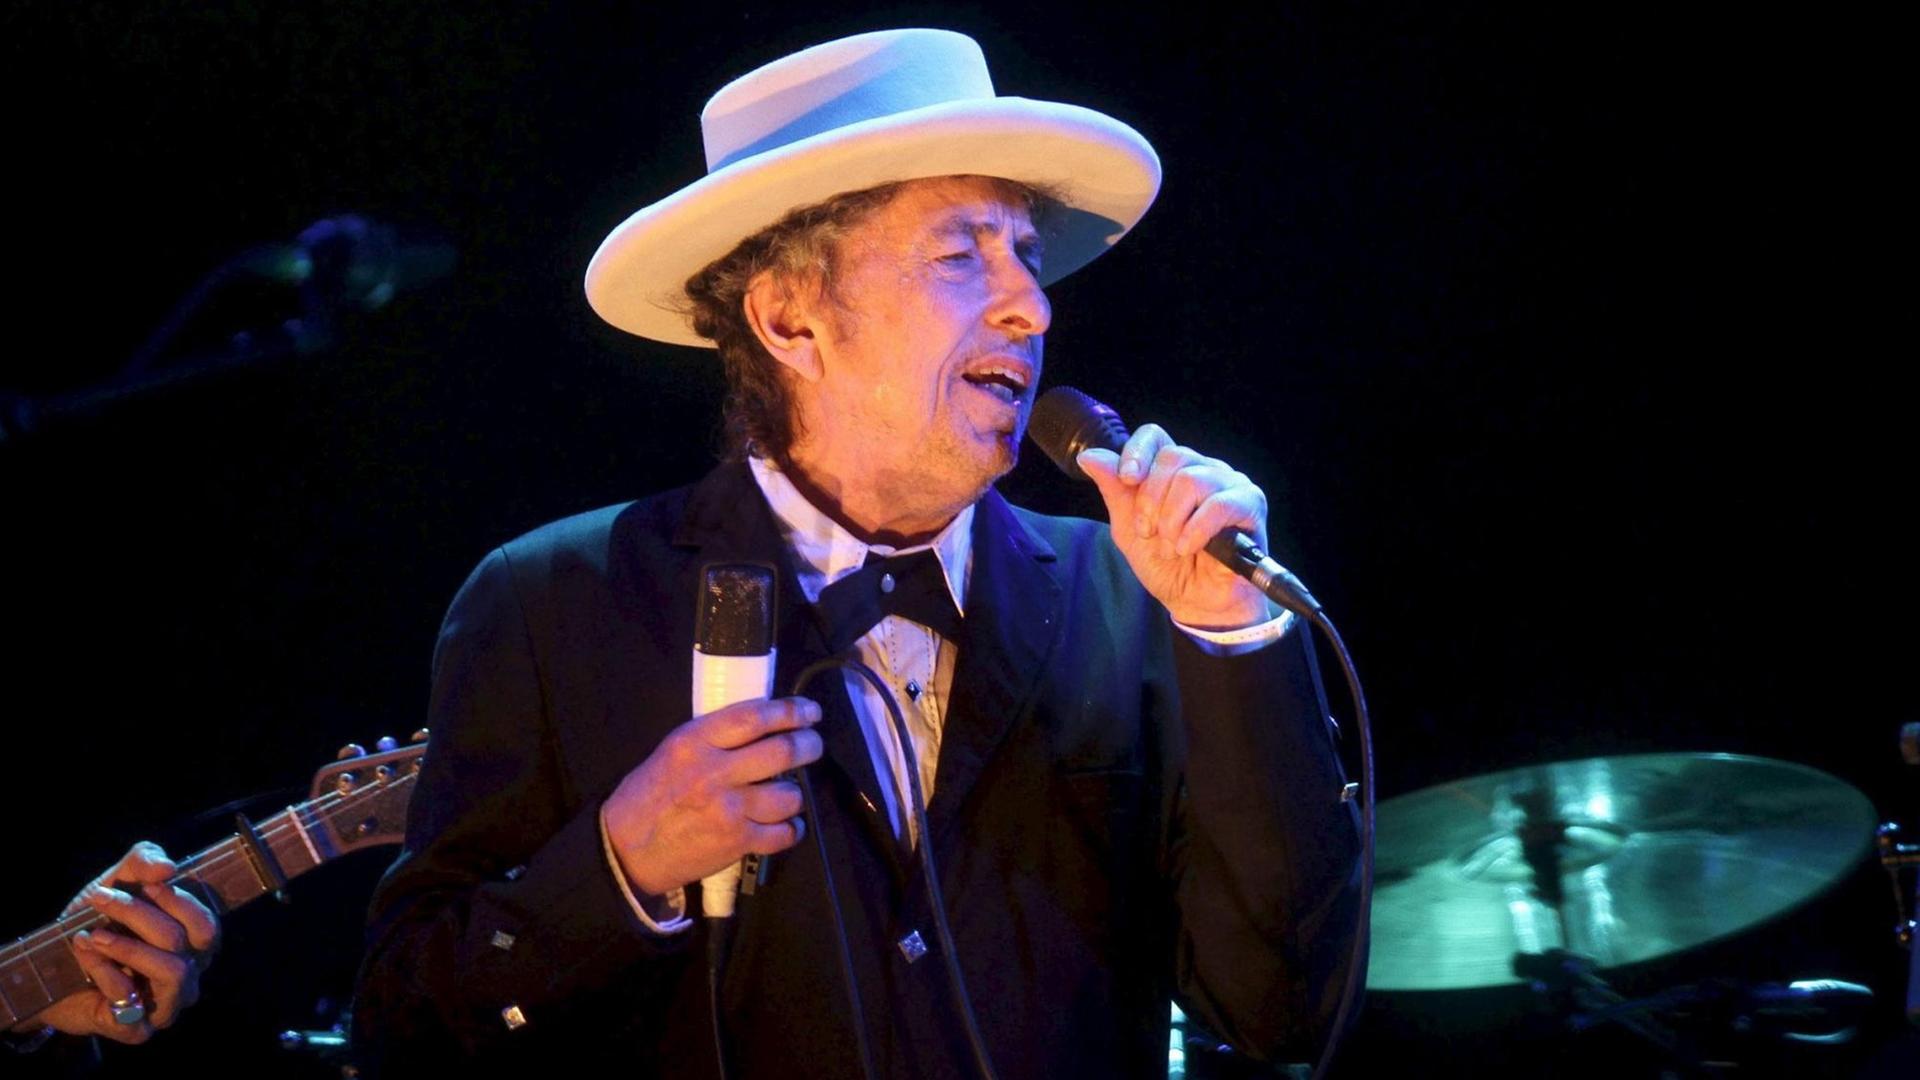 epa03306111 US musician Bob Dylan performs on stage during his concert on the second day of Benicassim International Music Festival (FIB) in Benicassim, Castellon, eastern Spain, 13 July 2012. EPA/DOMENECH CASTELLO |